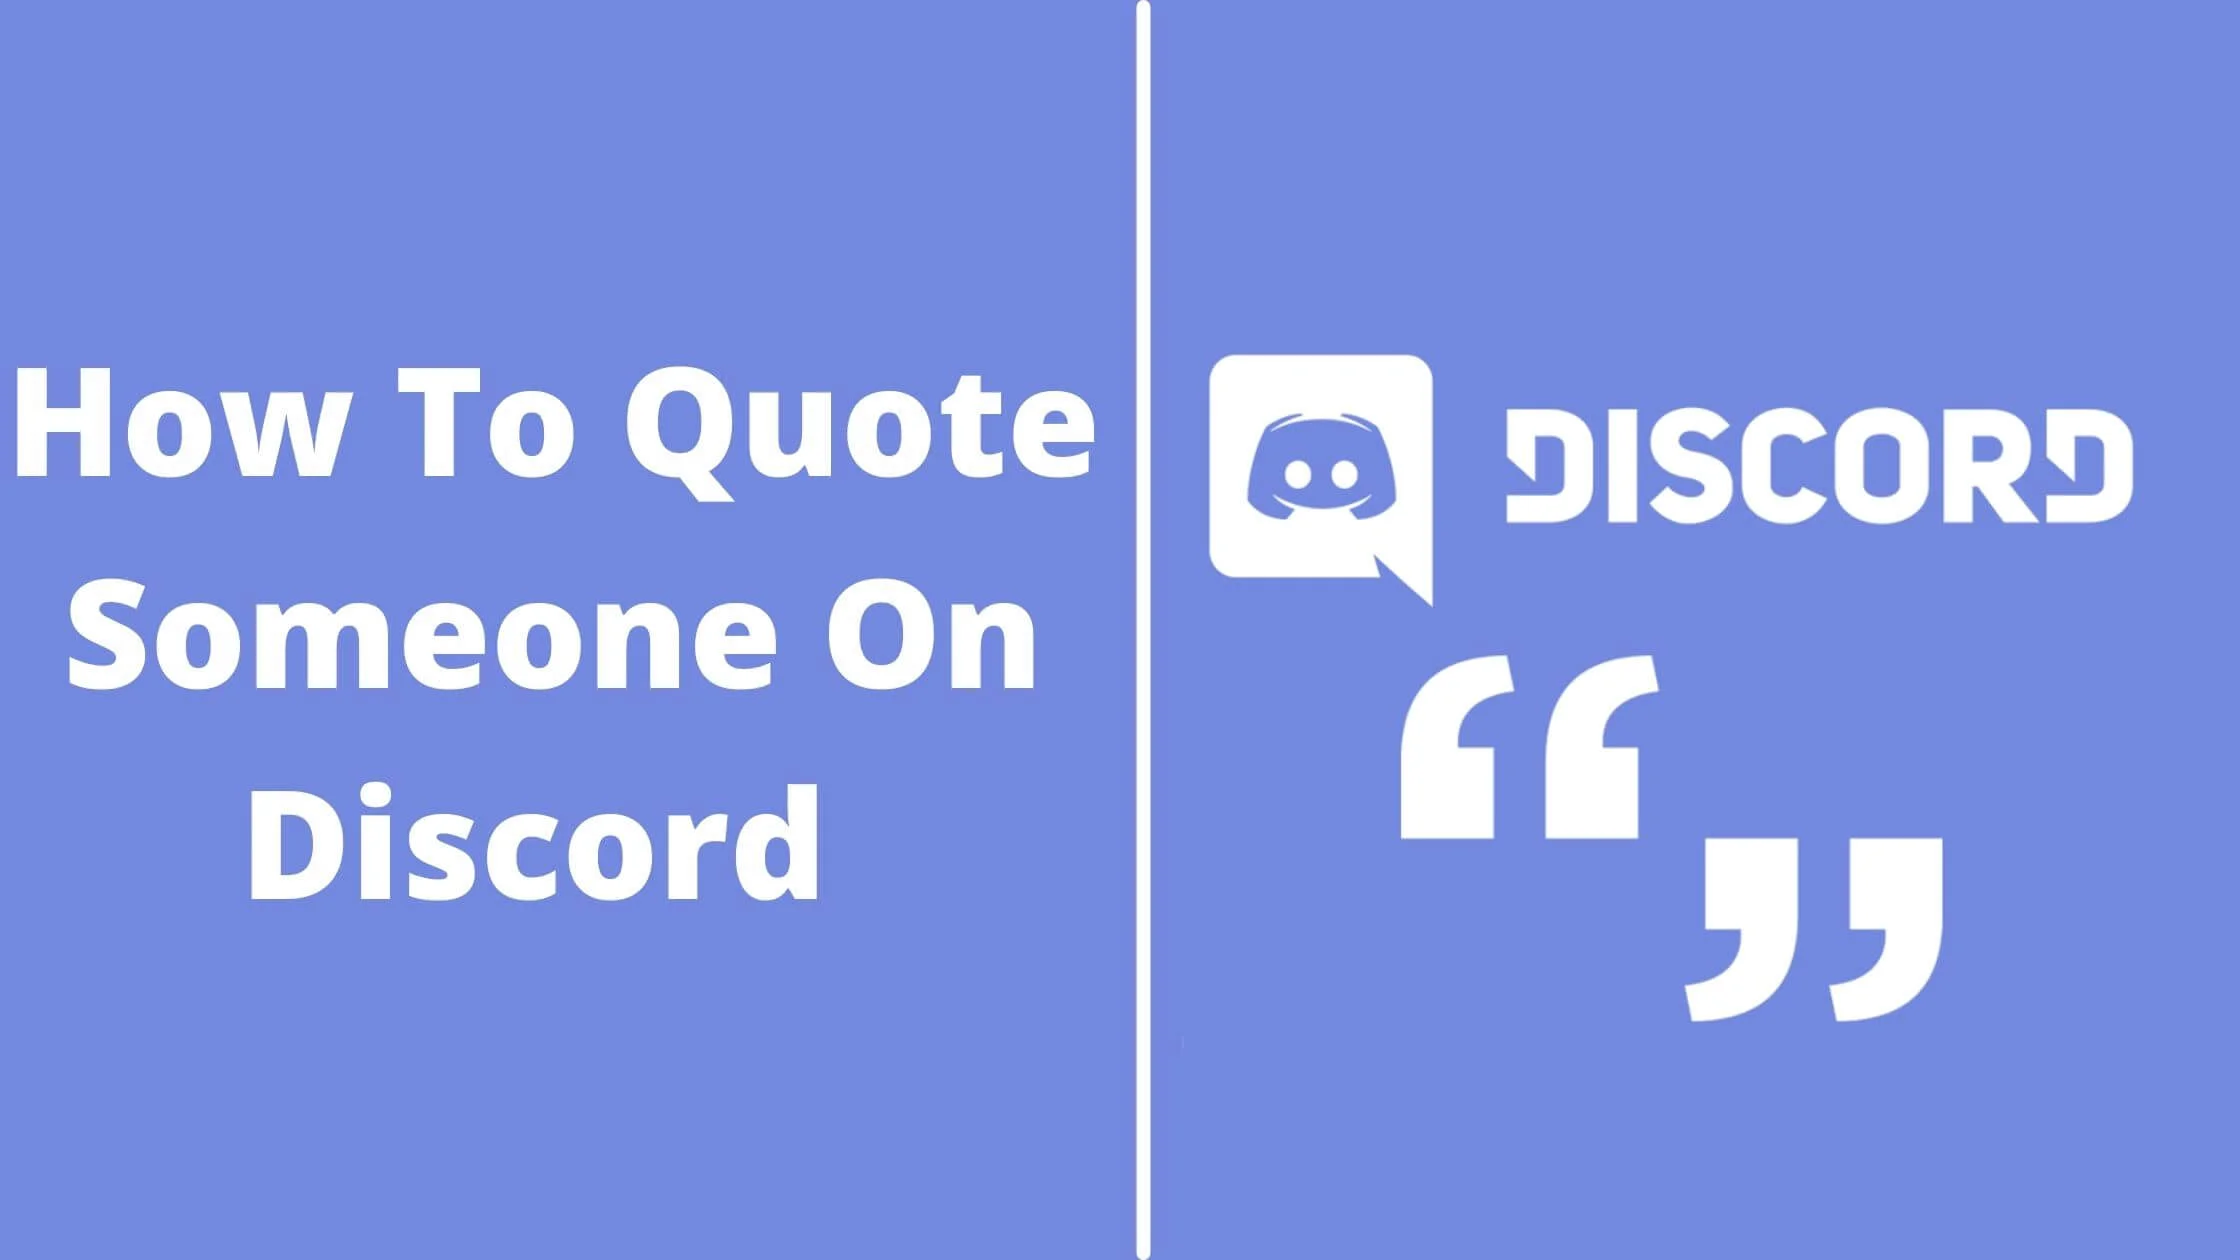 How To Quote Someone On Discord